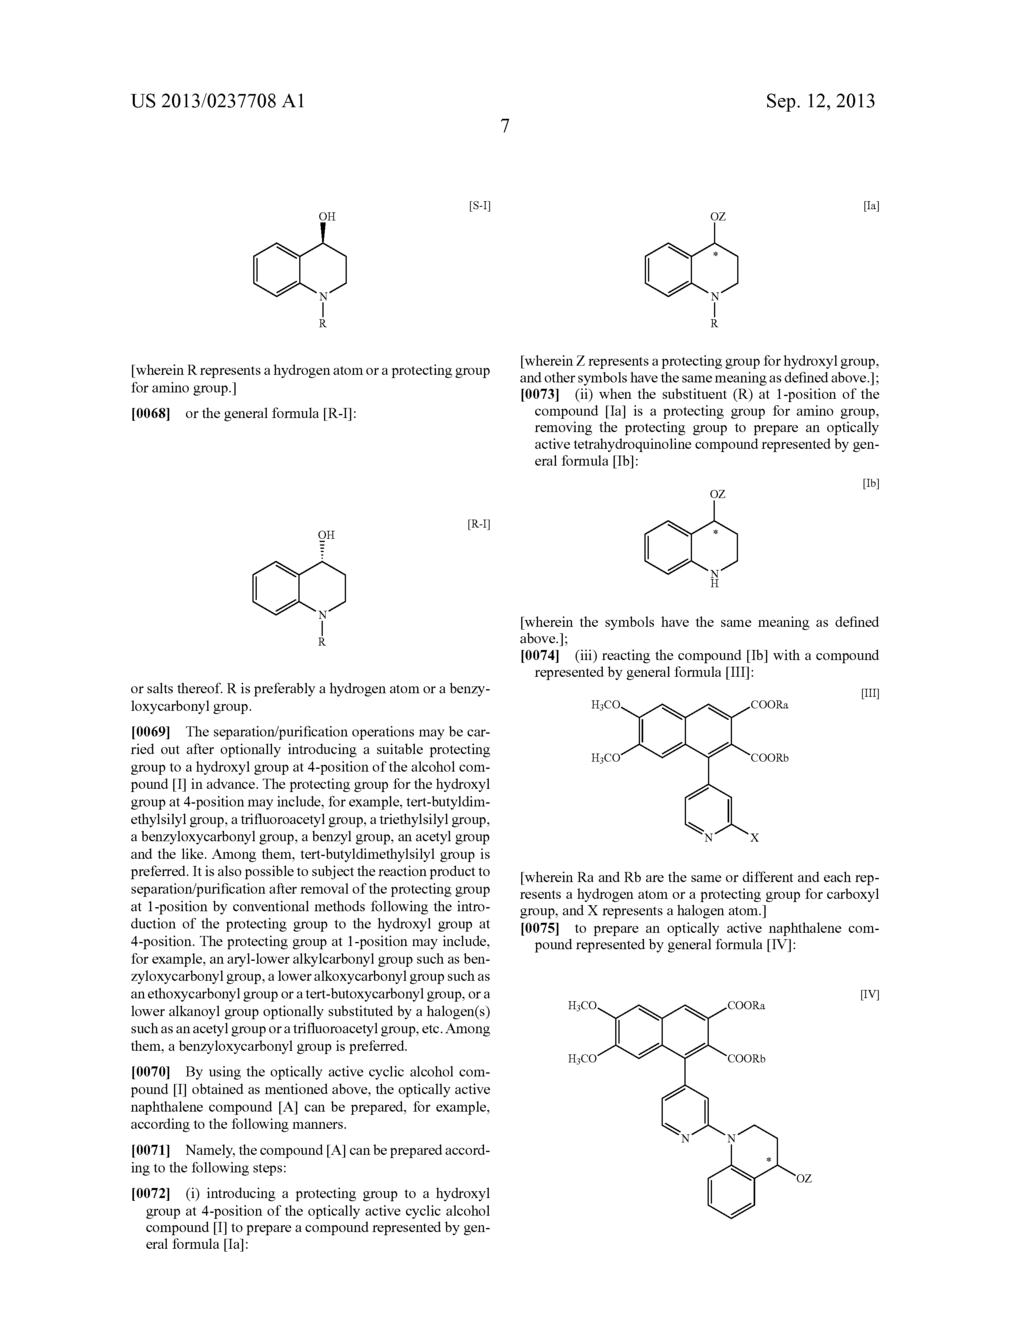 Optically Active Cyclic Alcohol Compound And Method For Preparing The Same - diagram, schematic, and image 08